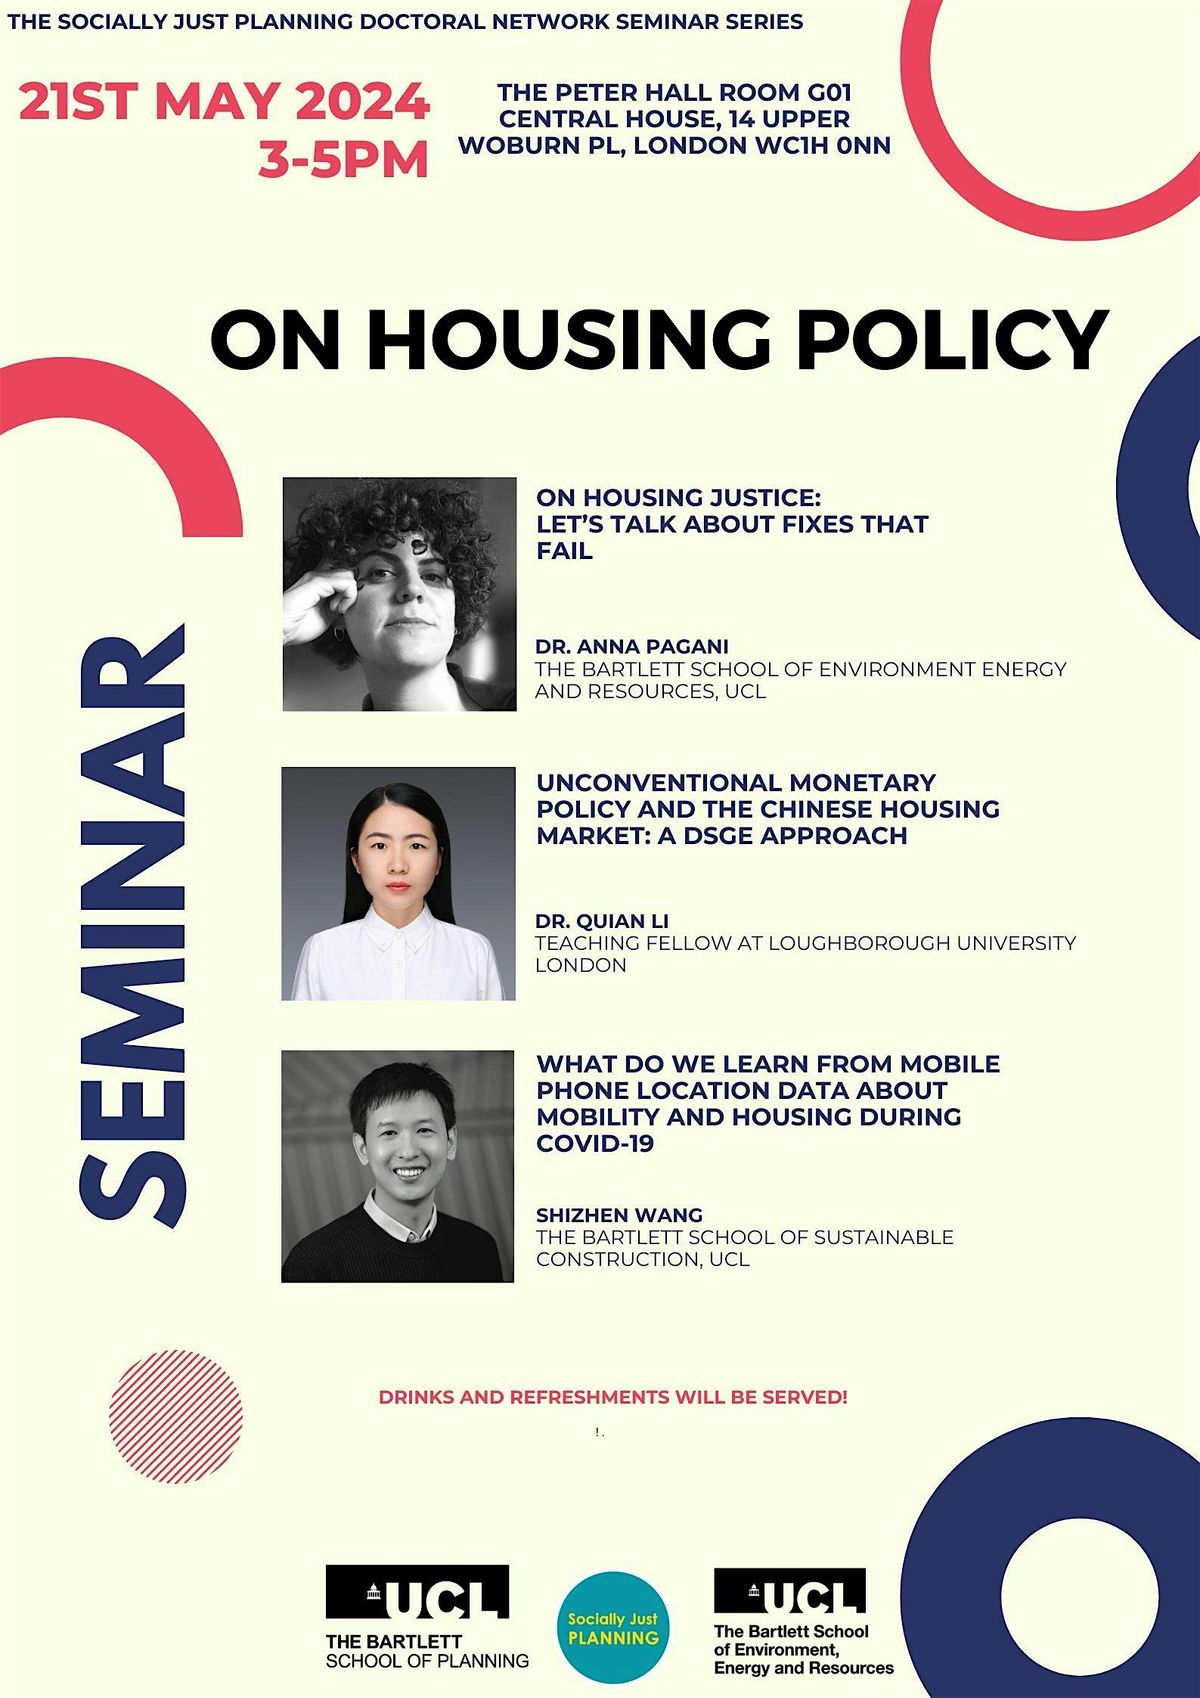 On housing policy